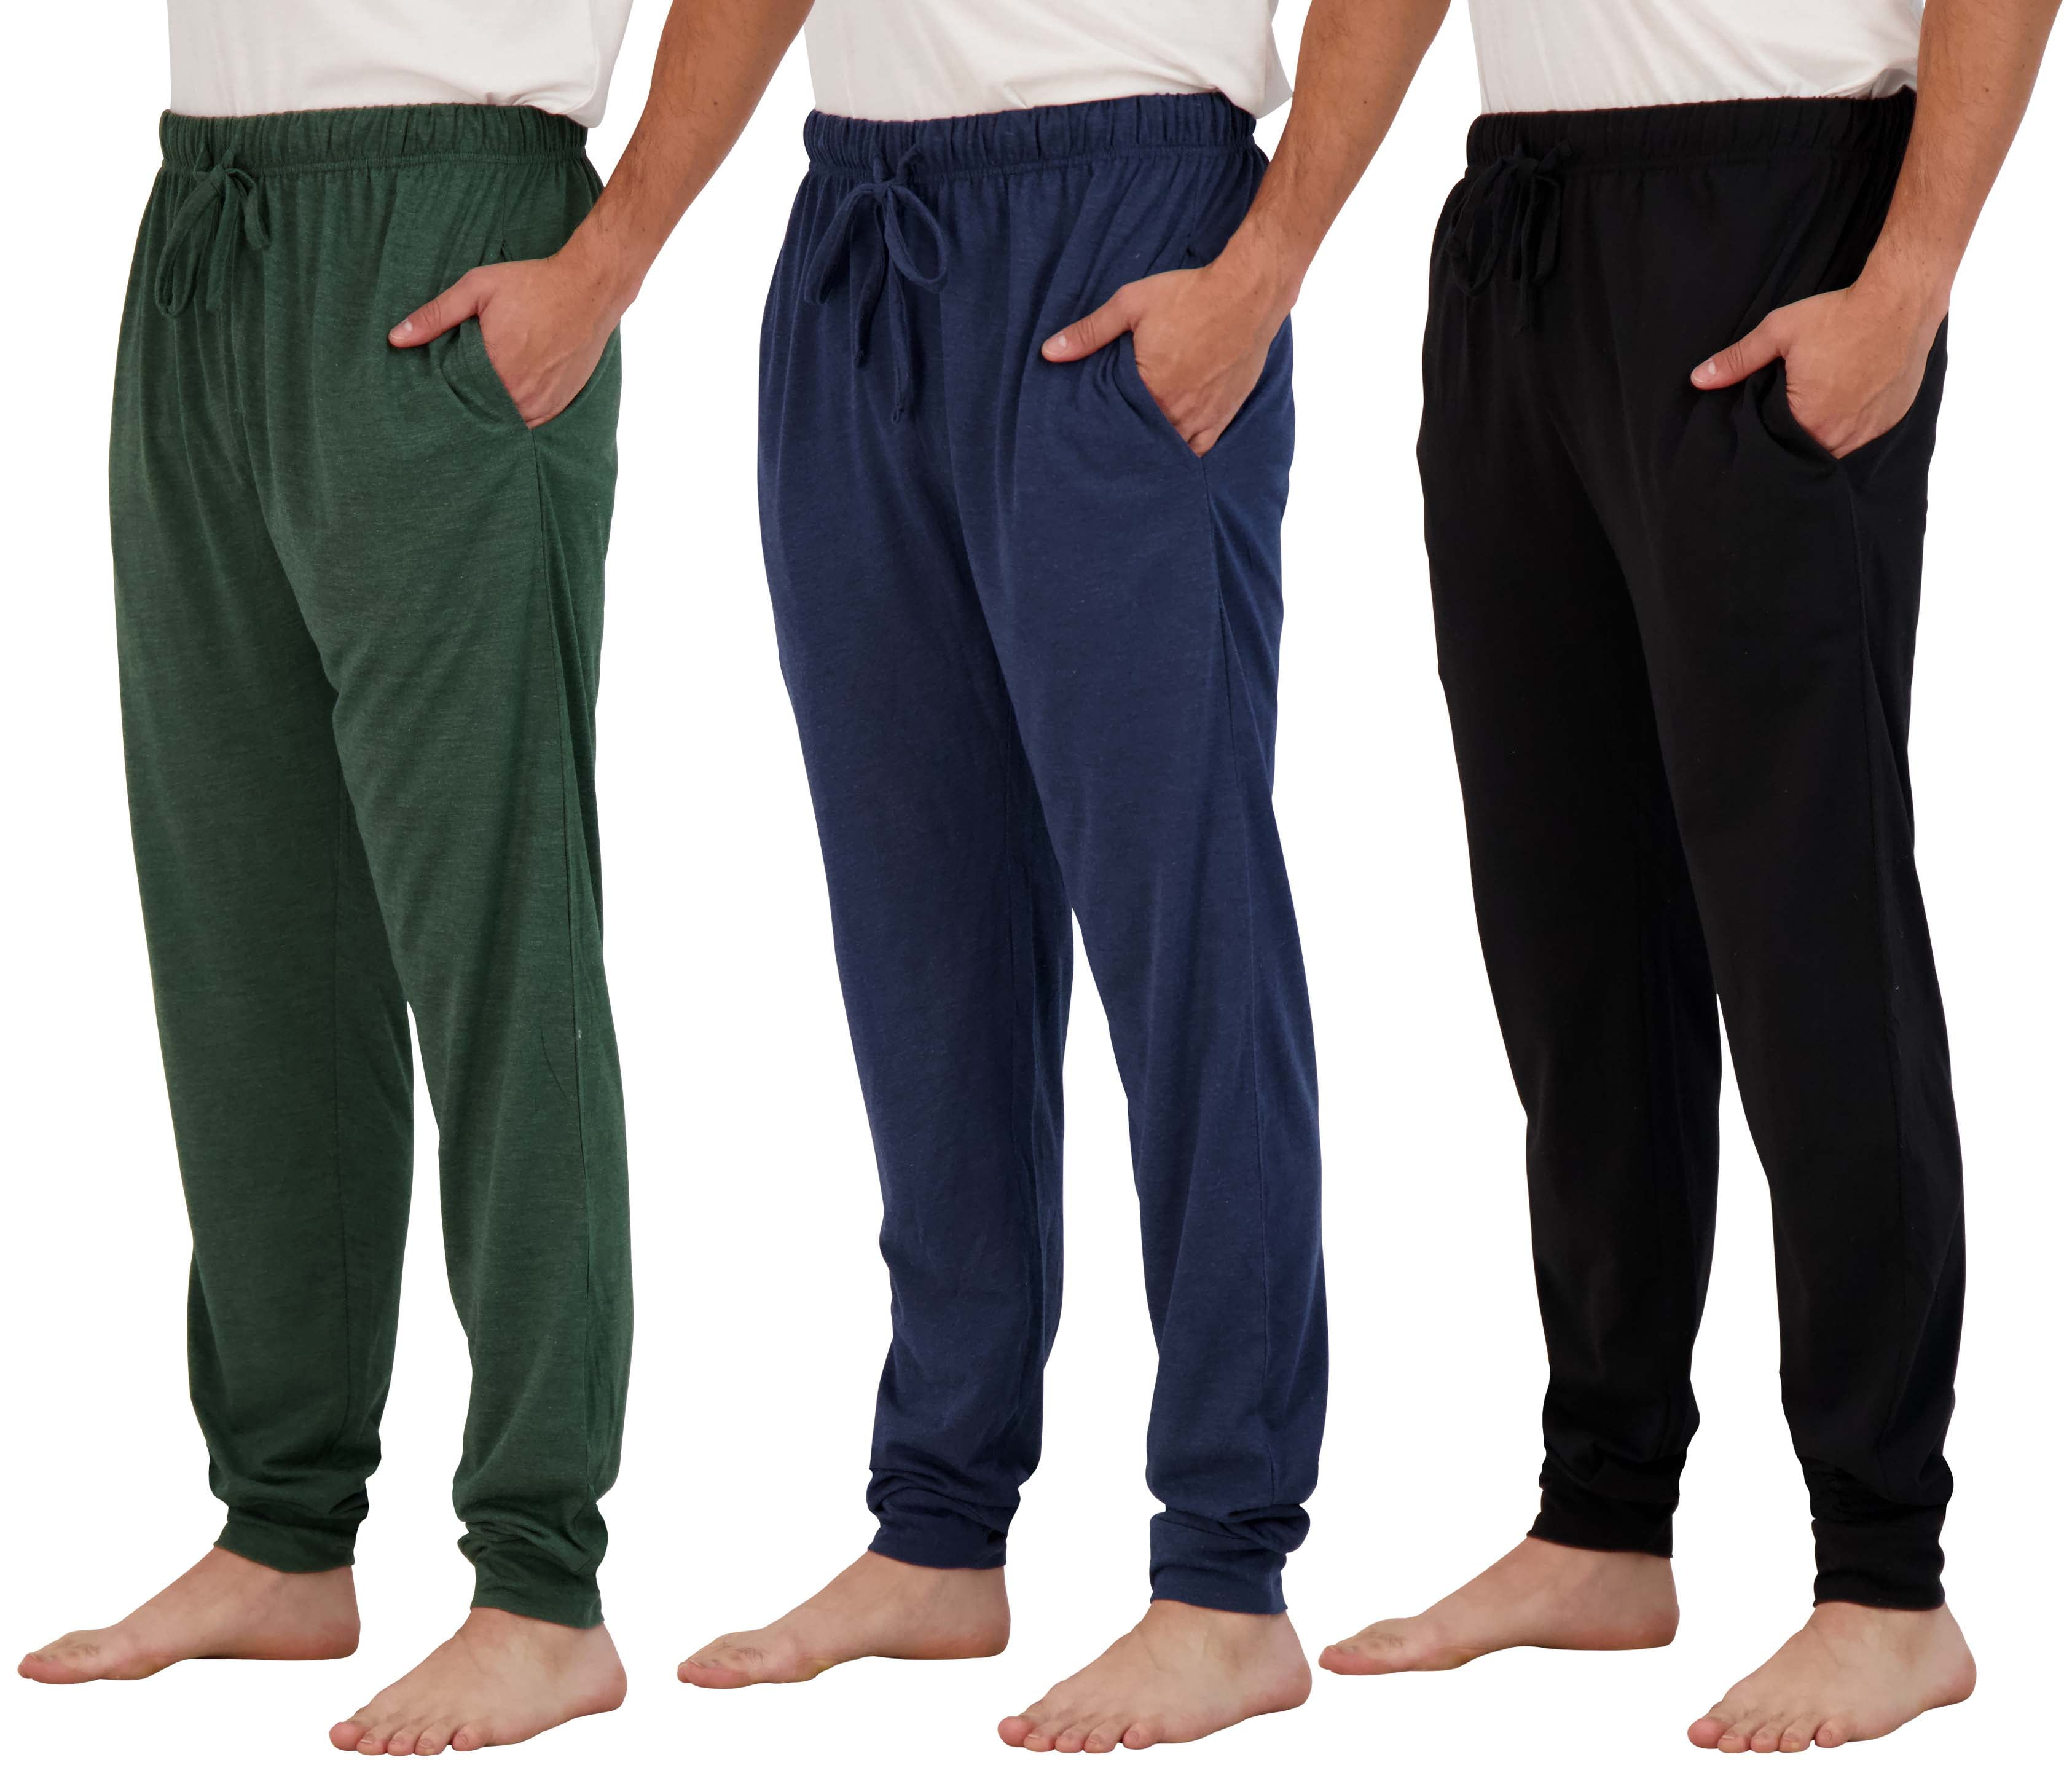 Real Essentials Men's 3-Pack Soft Knit Joggers Sleep Pants, Sizes S-3XL ...